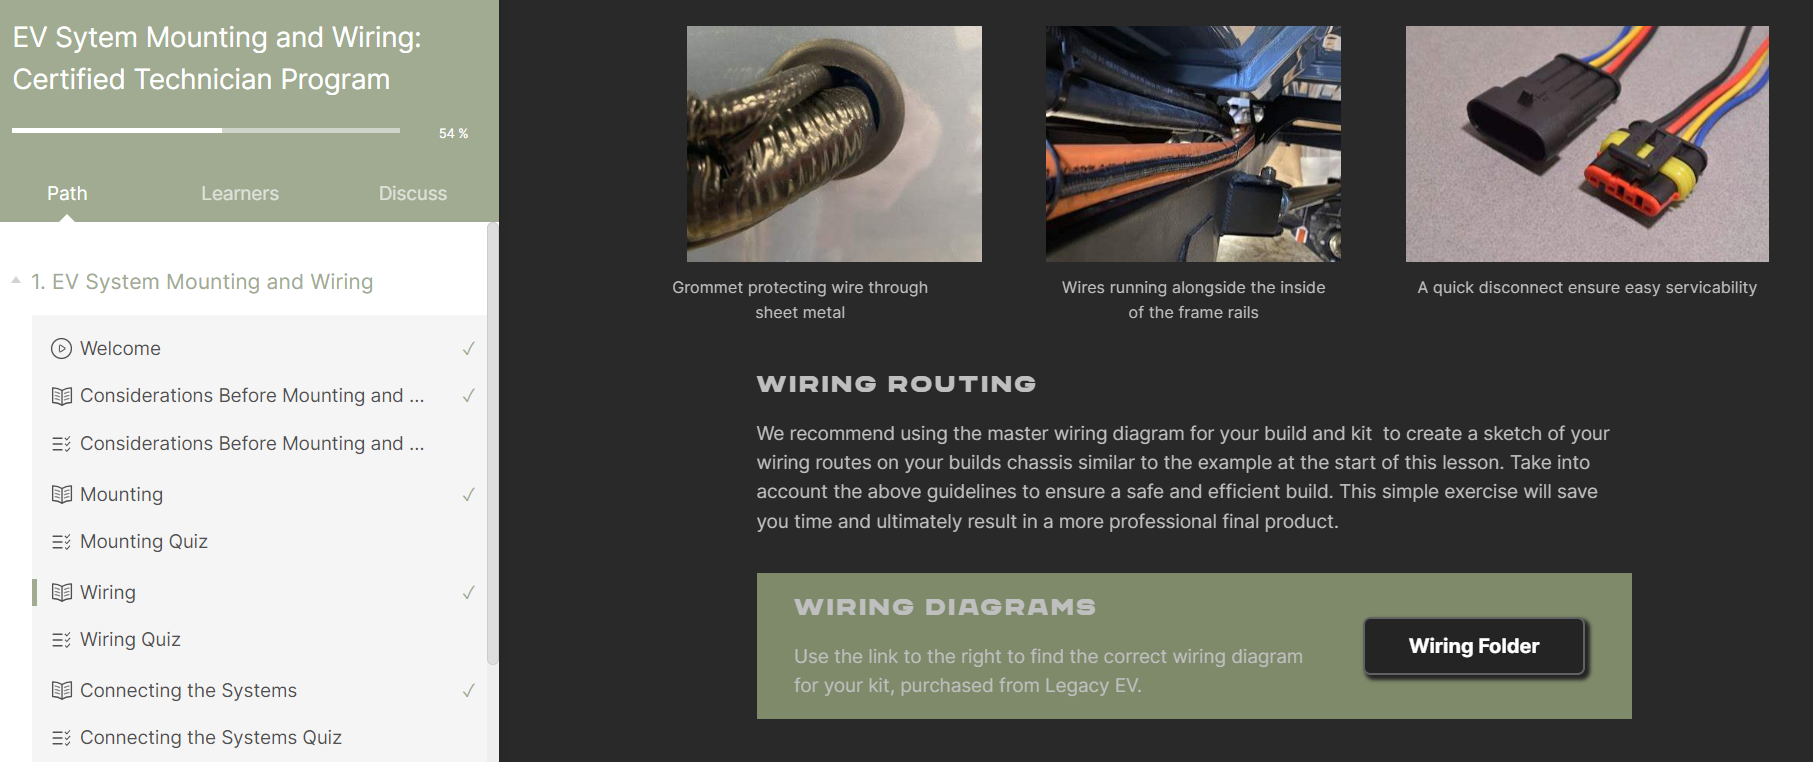 EV System Mounting and Wiring Virtual Course